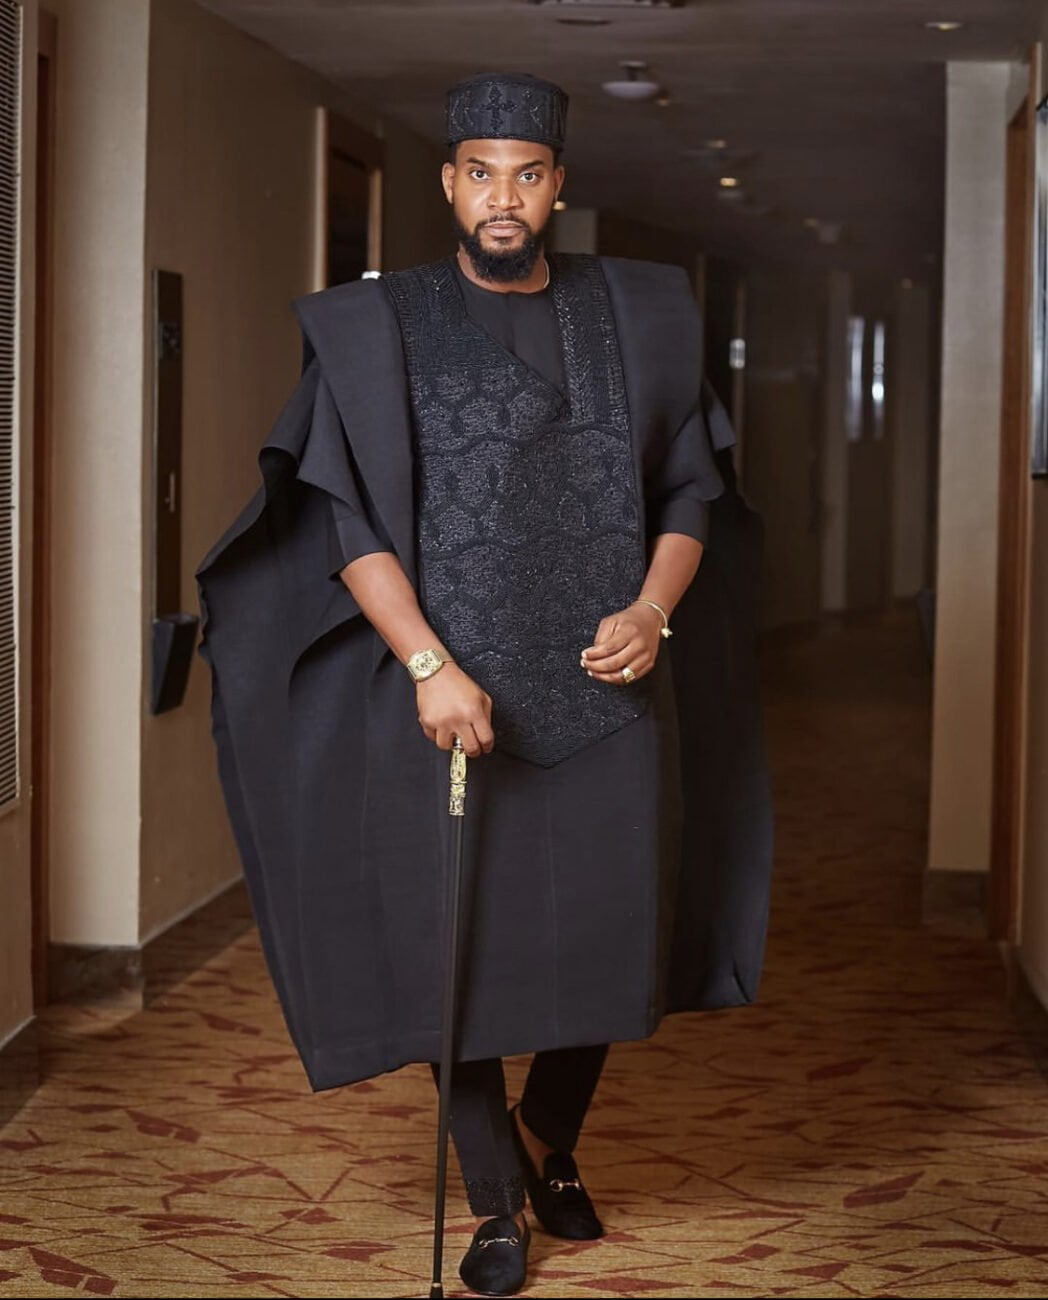 Kunle Remi looking majestic in a classy outfit suitable for weddings, naming ceremonies, and church services.